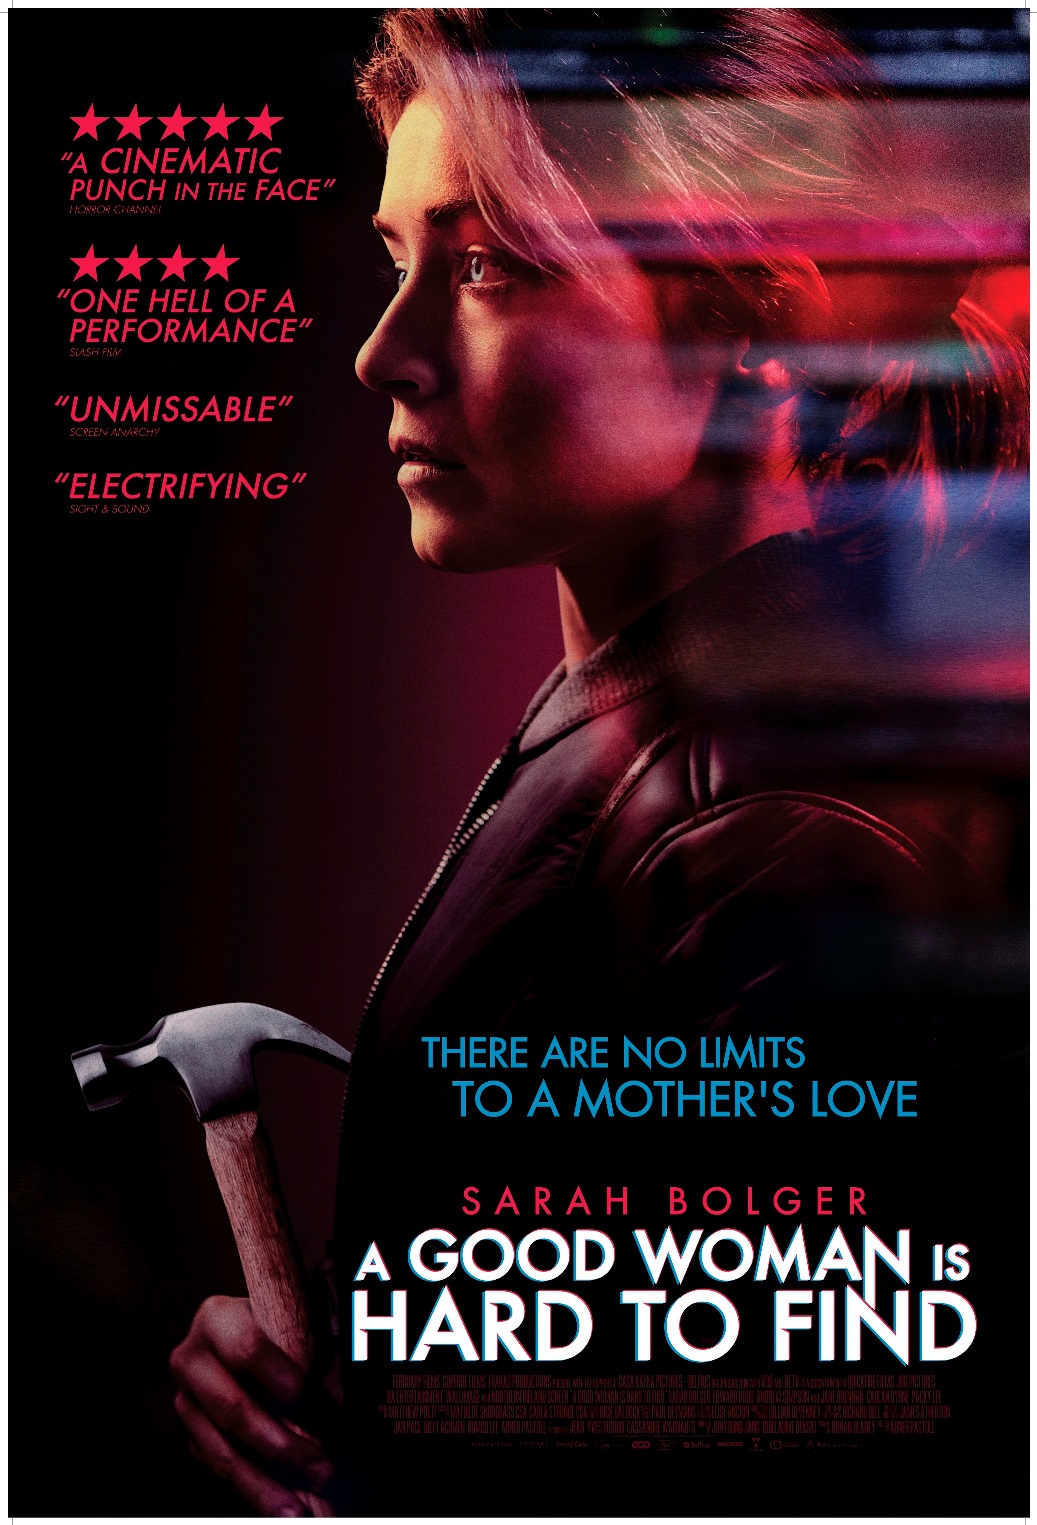 A Good Woman Is Hard to Find *A Good Woman Is Hard to Find* (2019) 1080p, WebRip, HUNSUB, Data Premium A-Good-Woman_AW